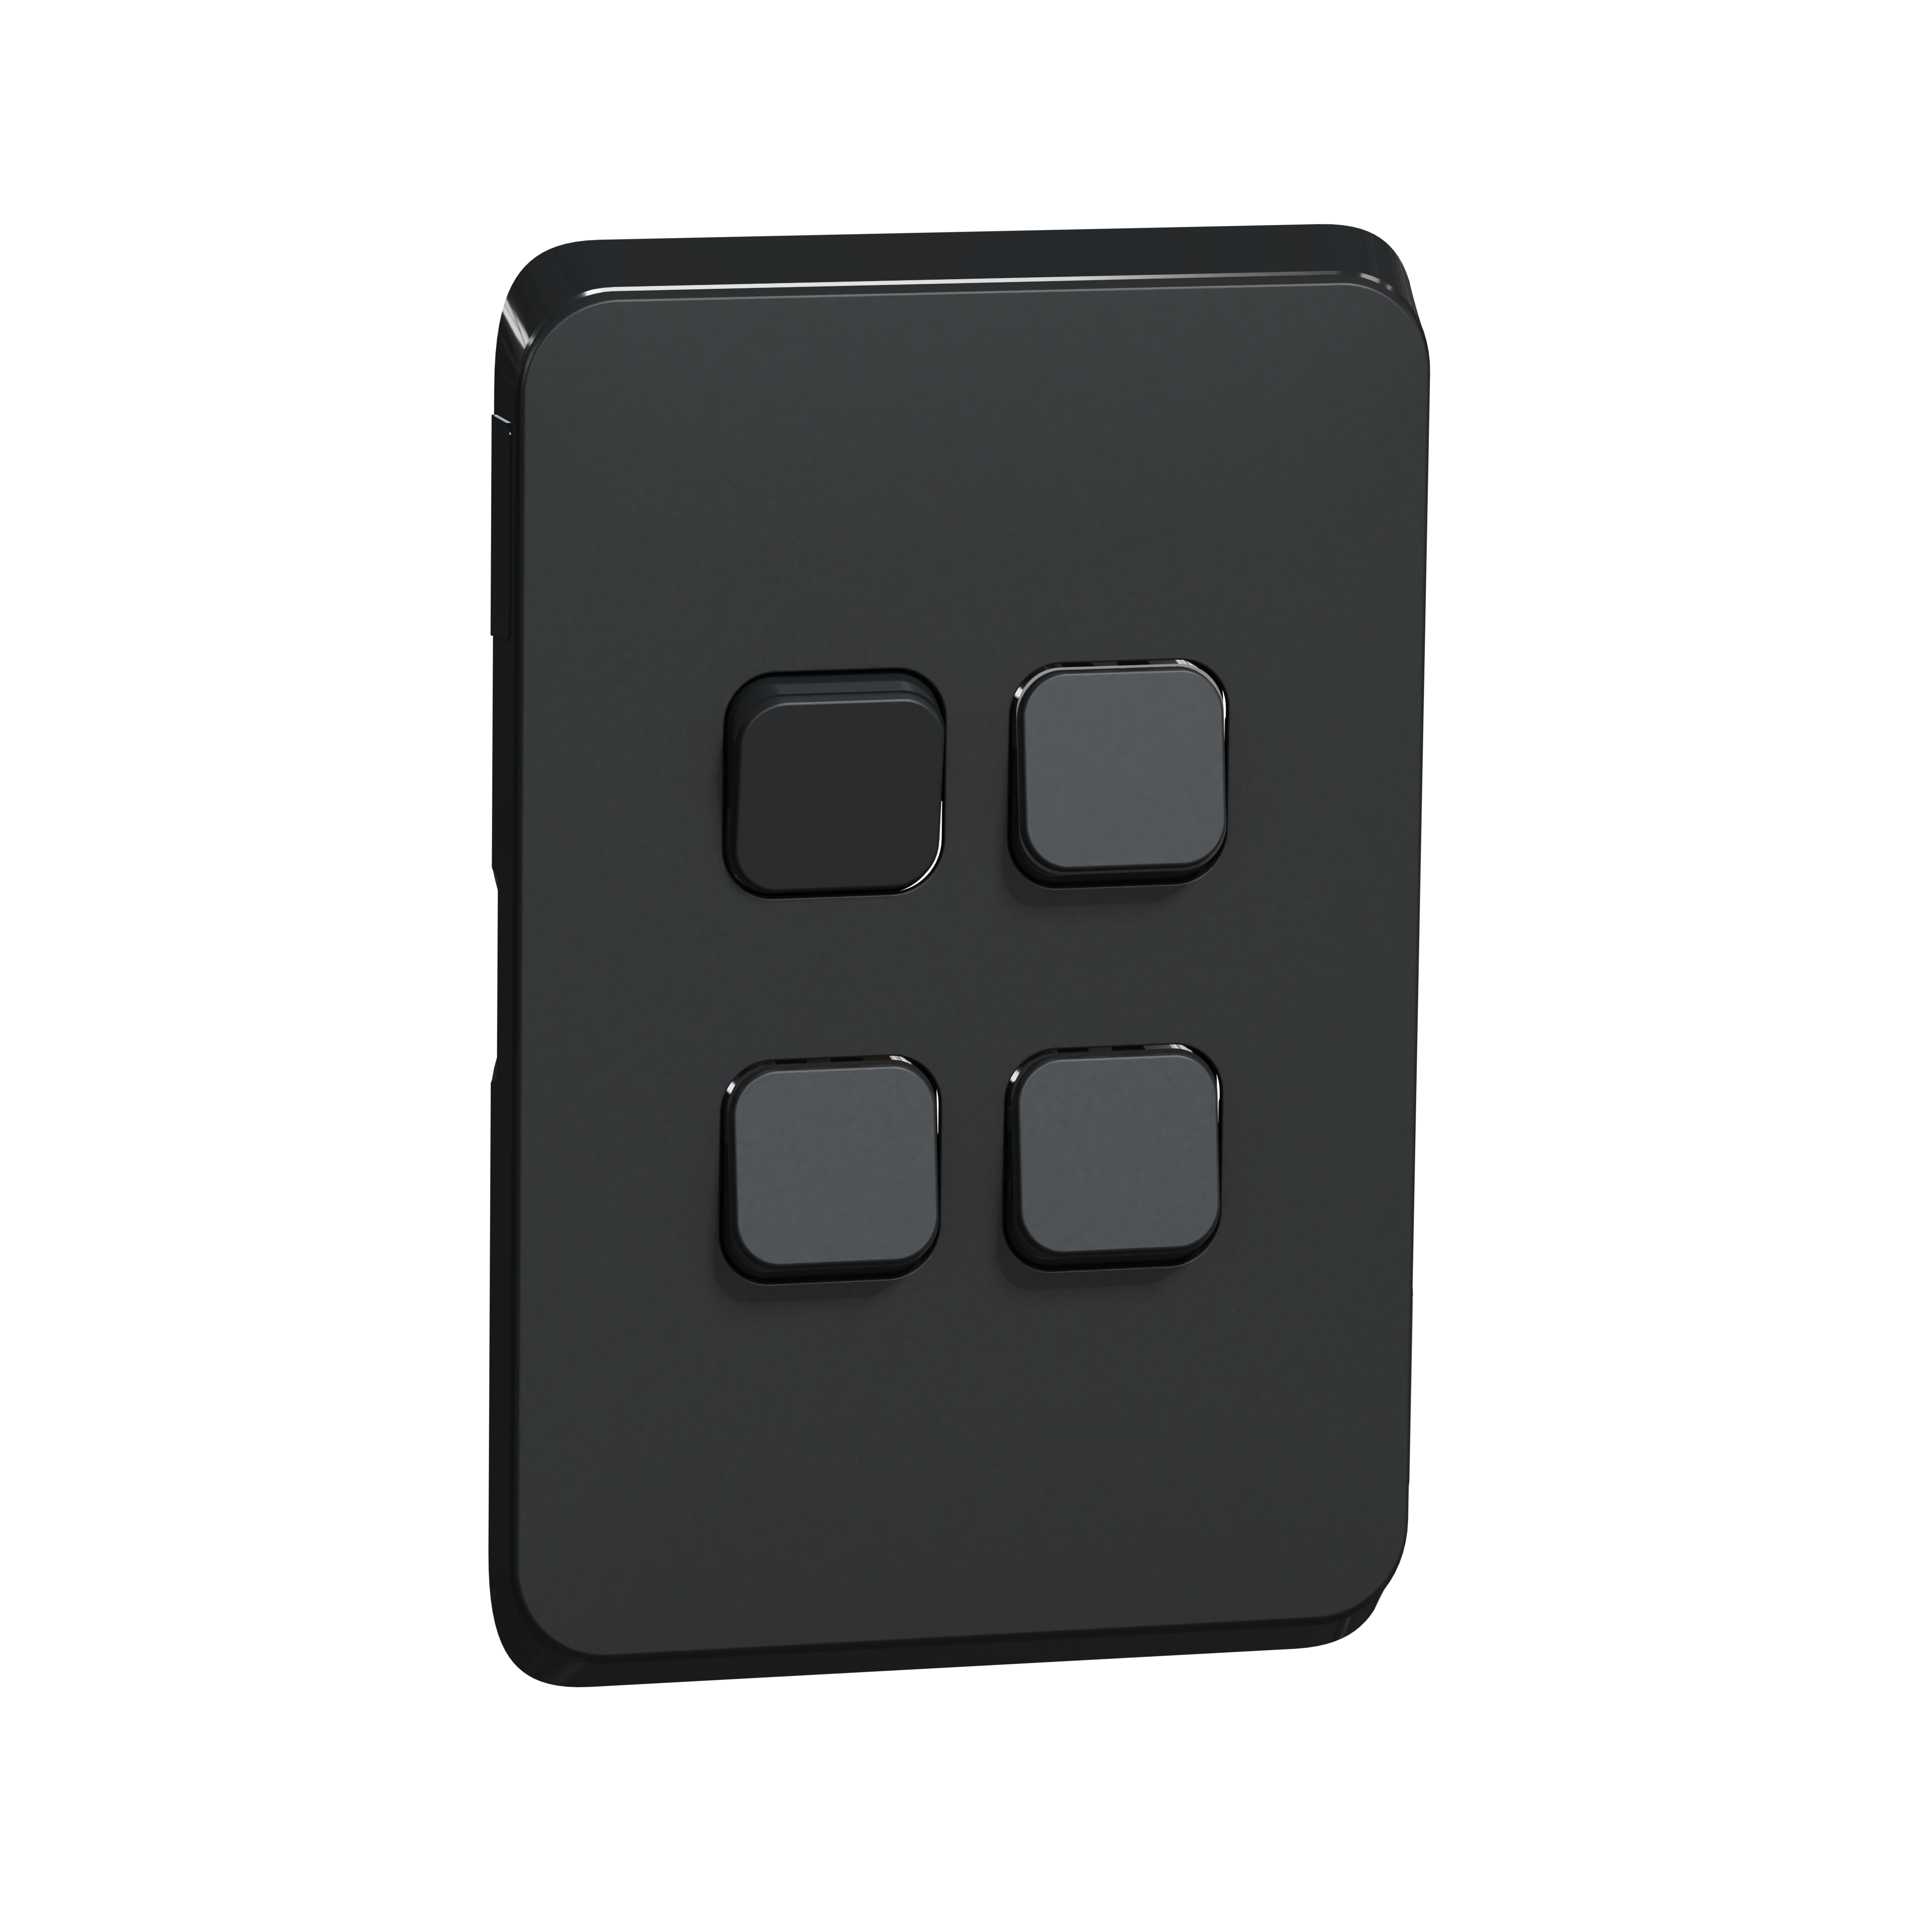 PDL384C-XB - PDL Iconic Cover Plate Switch 4Gang - Black